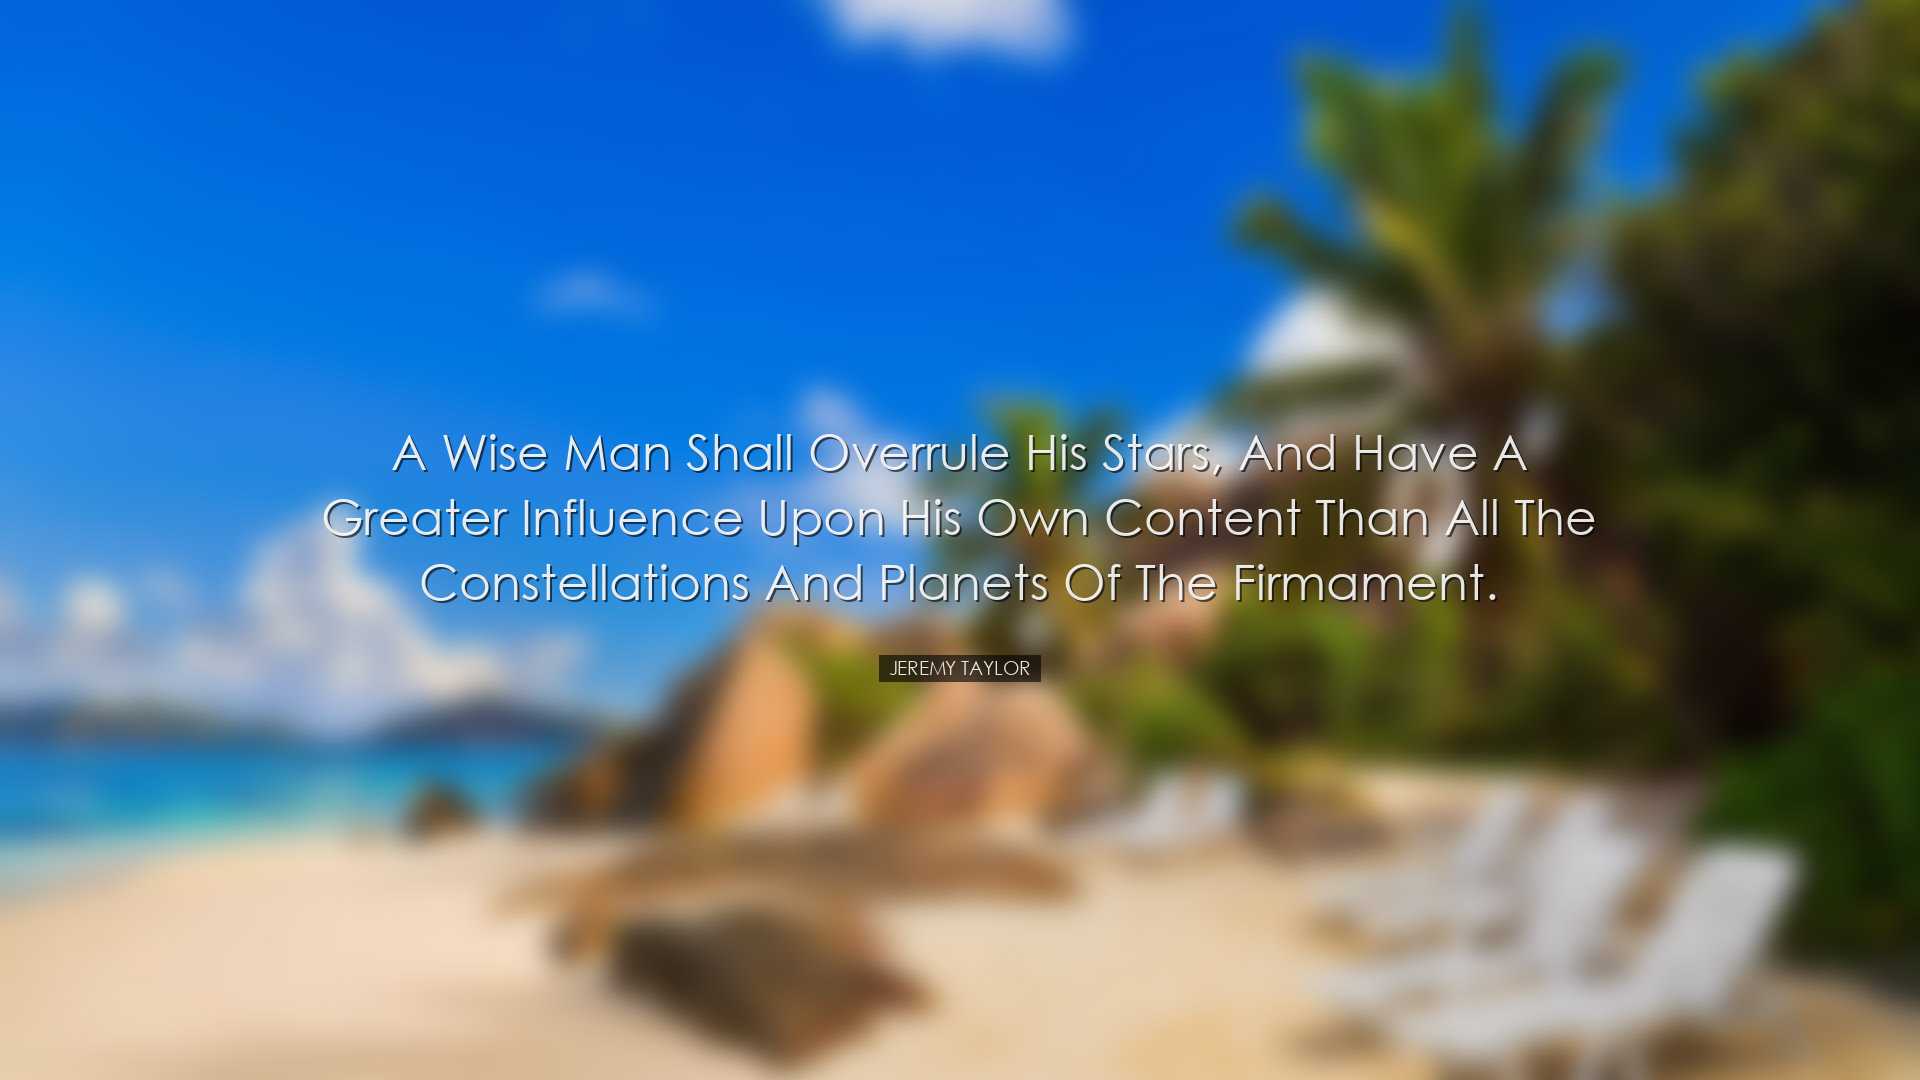 A wise man shall overrule his stars, and have a greater influence